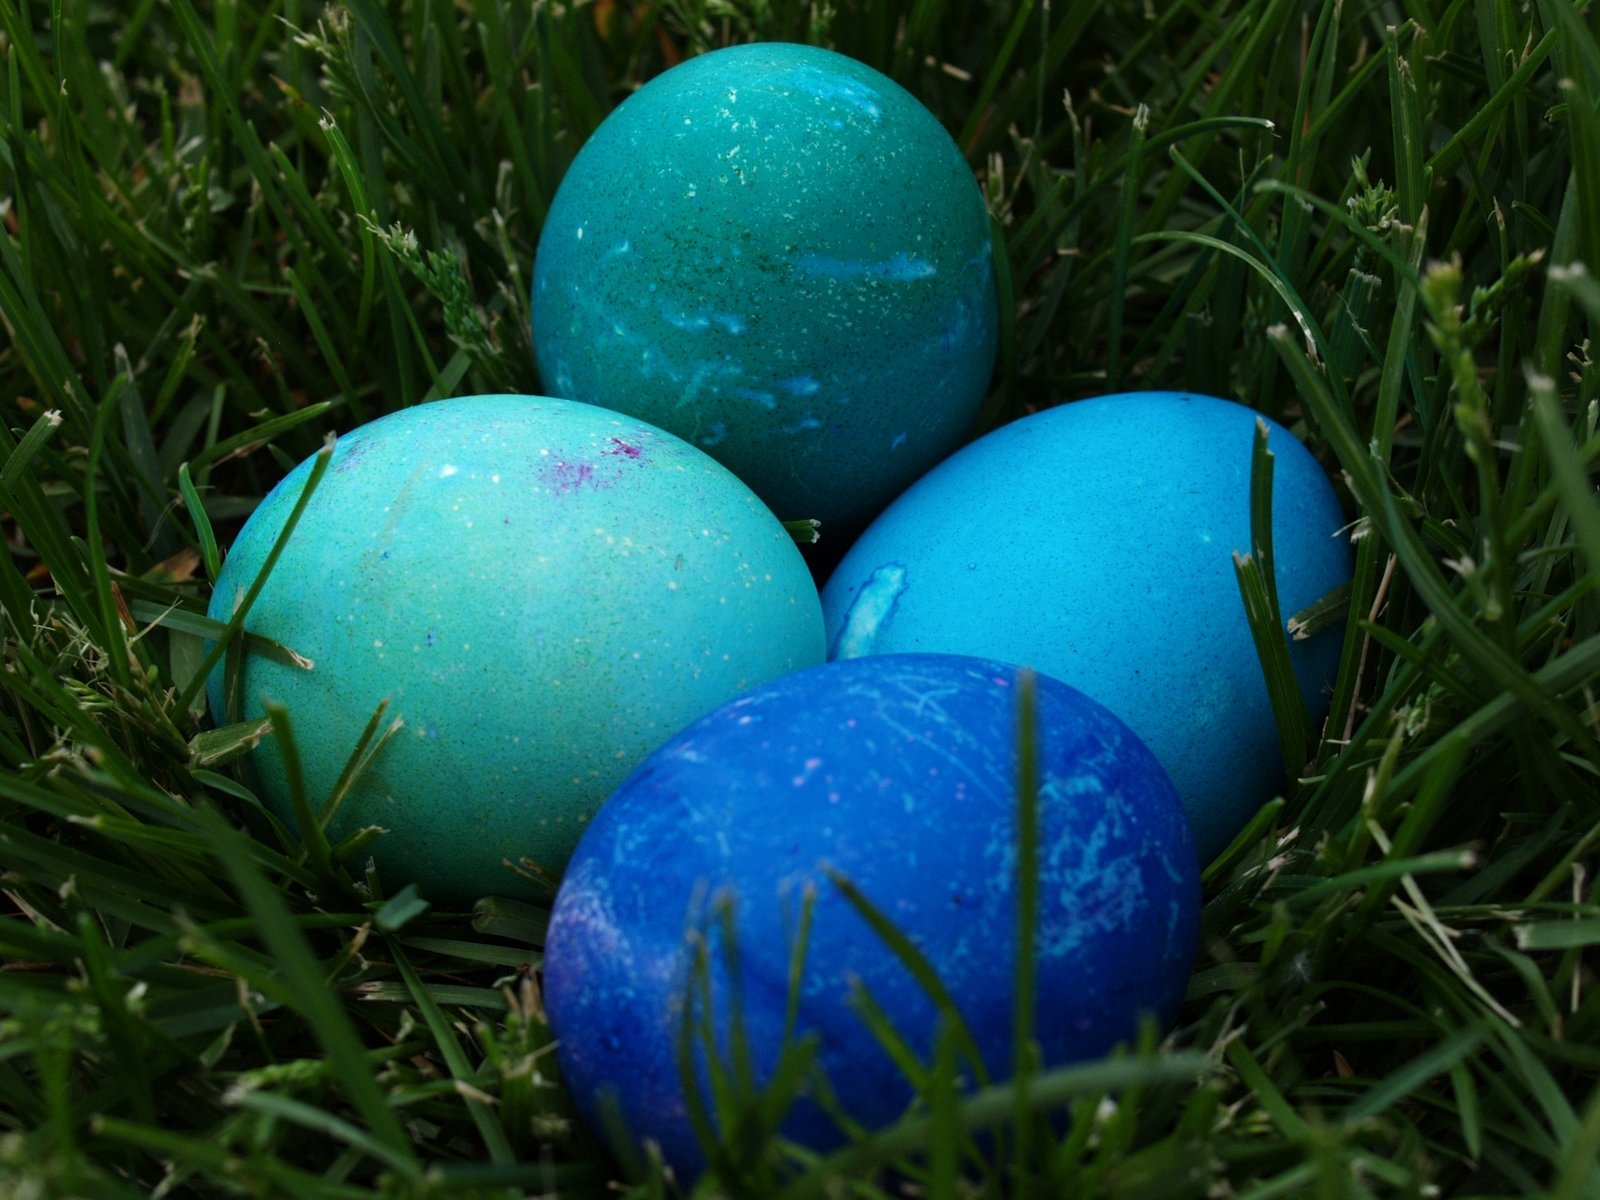 blue and green eggs laying in the grass